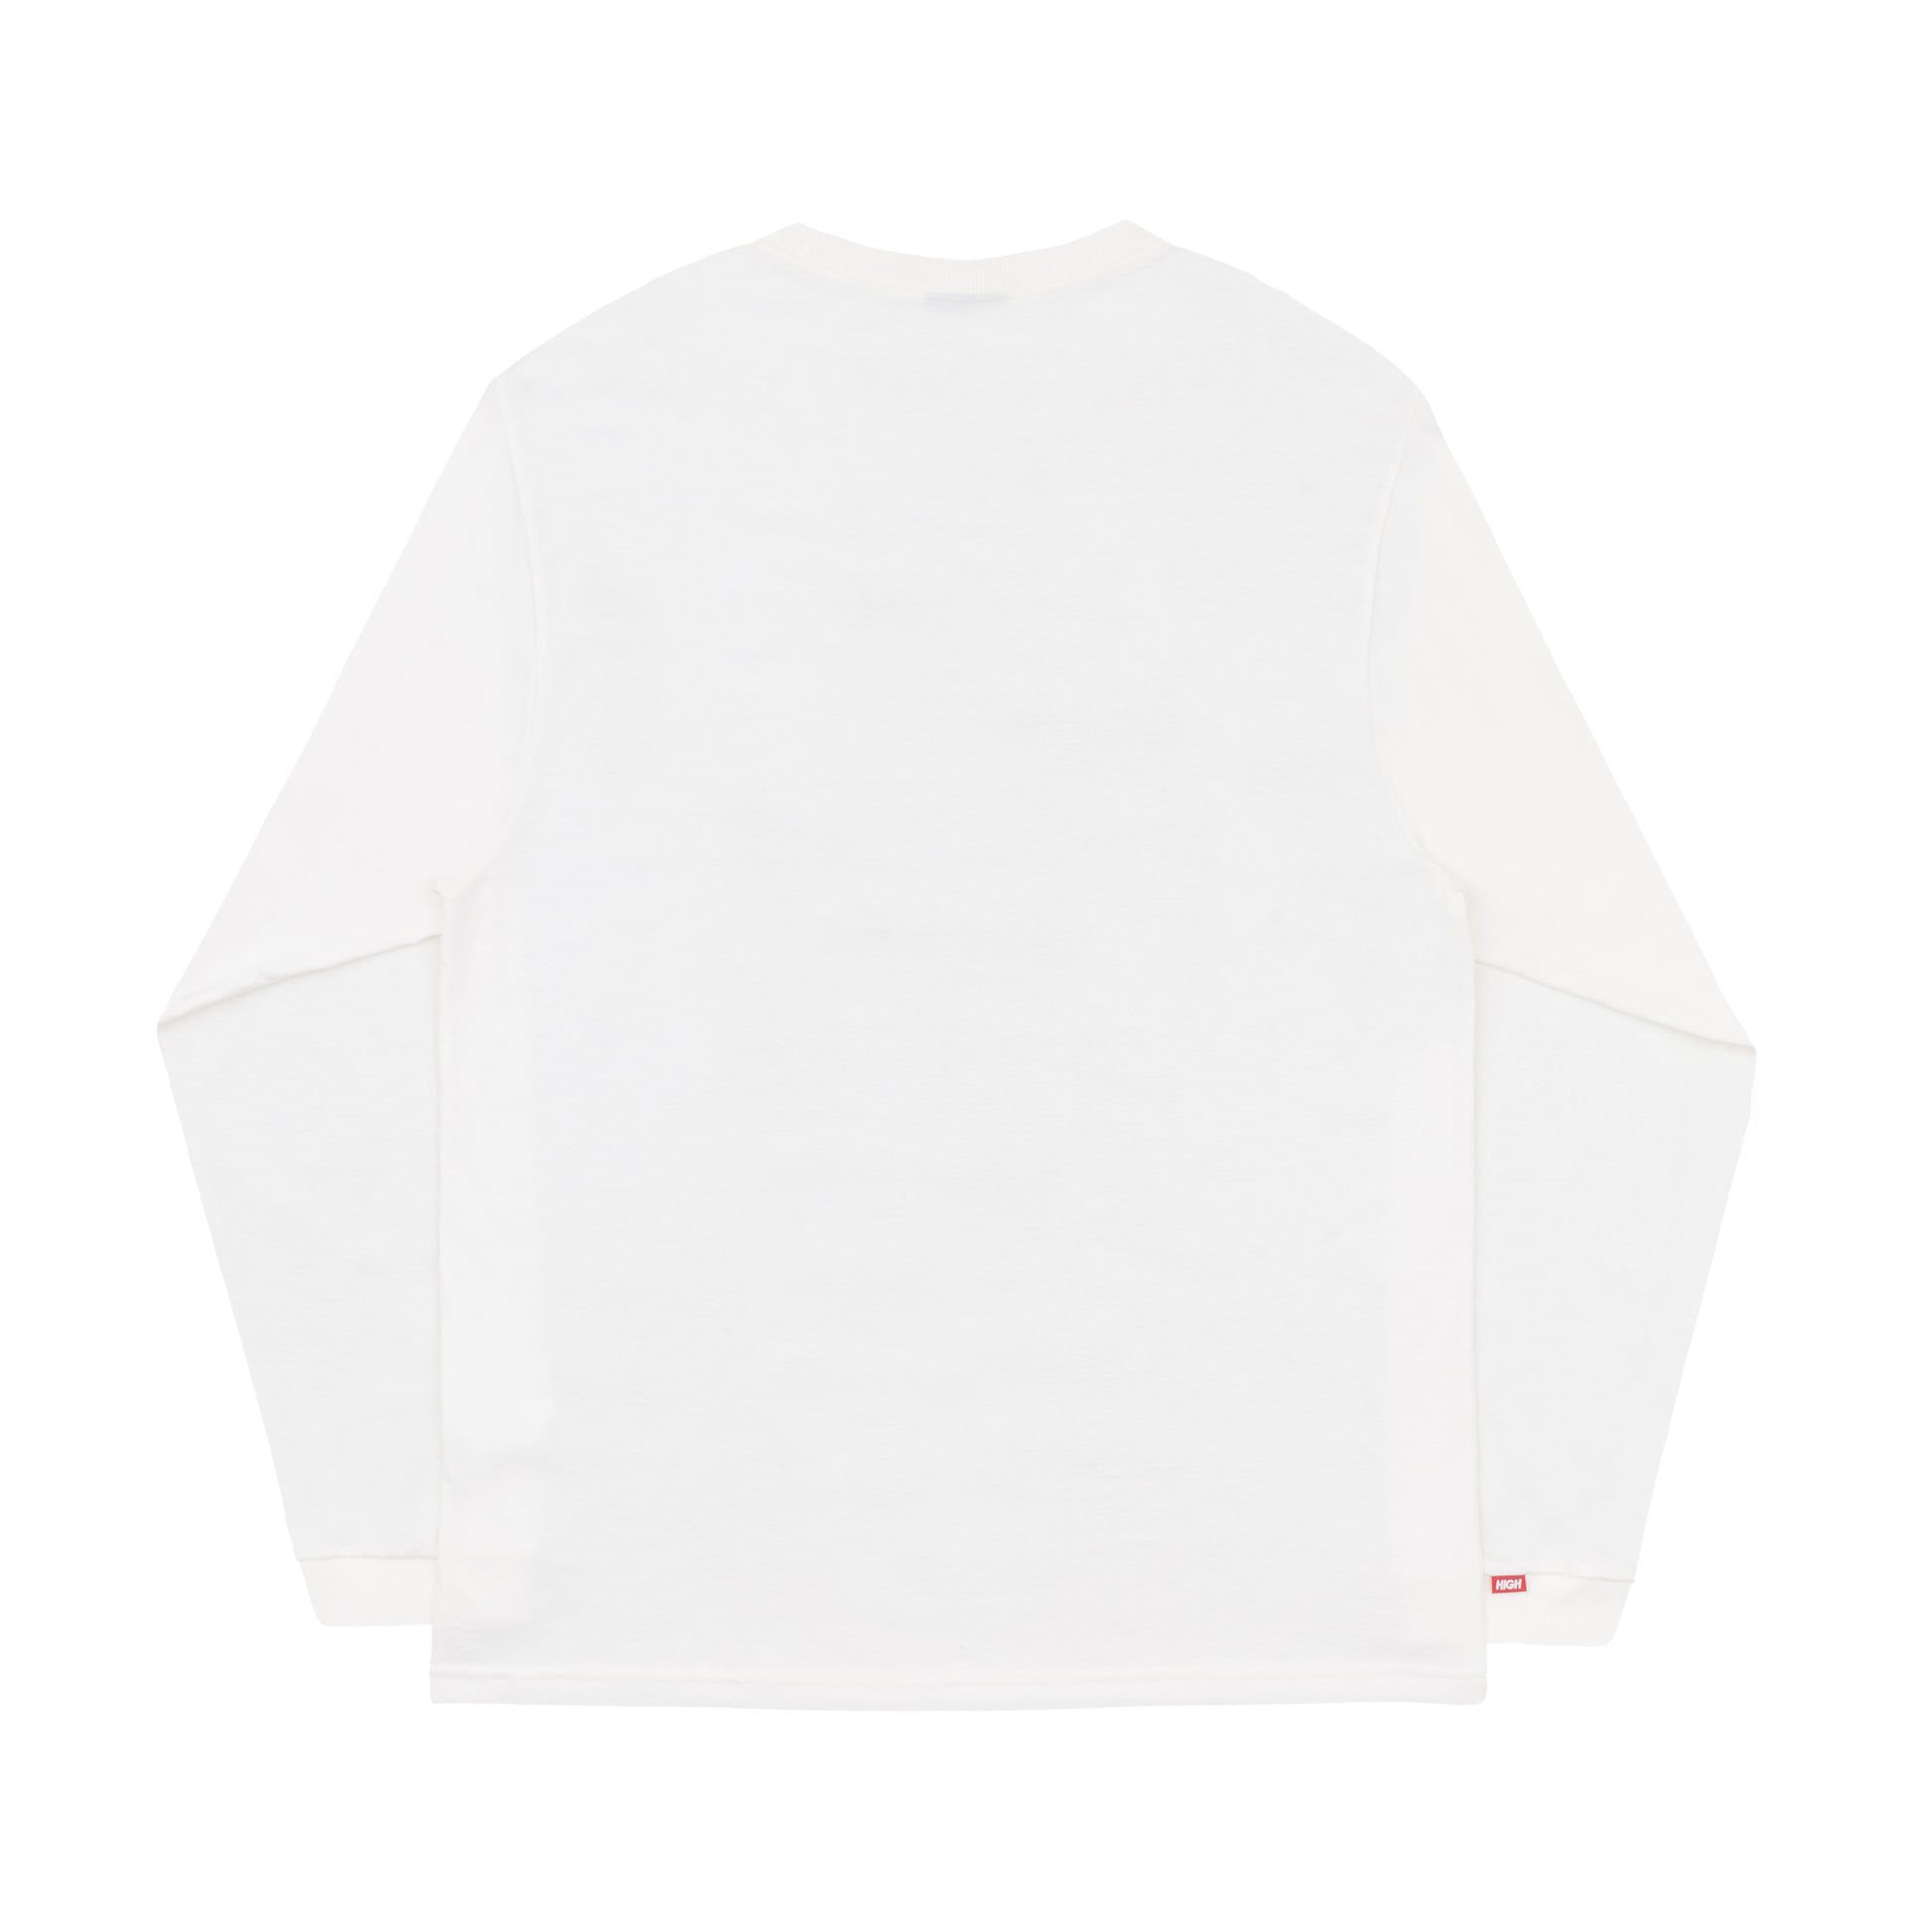 HIGH - Longsleeve Synth White - Slow Office